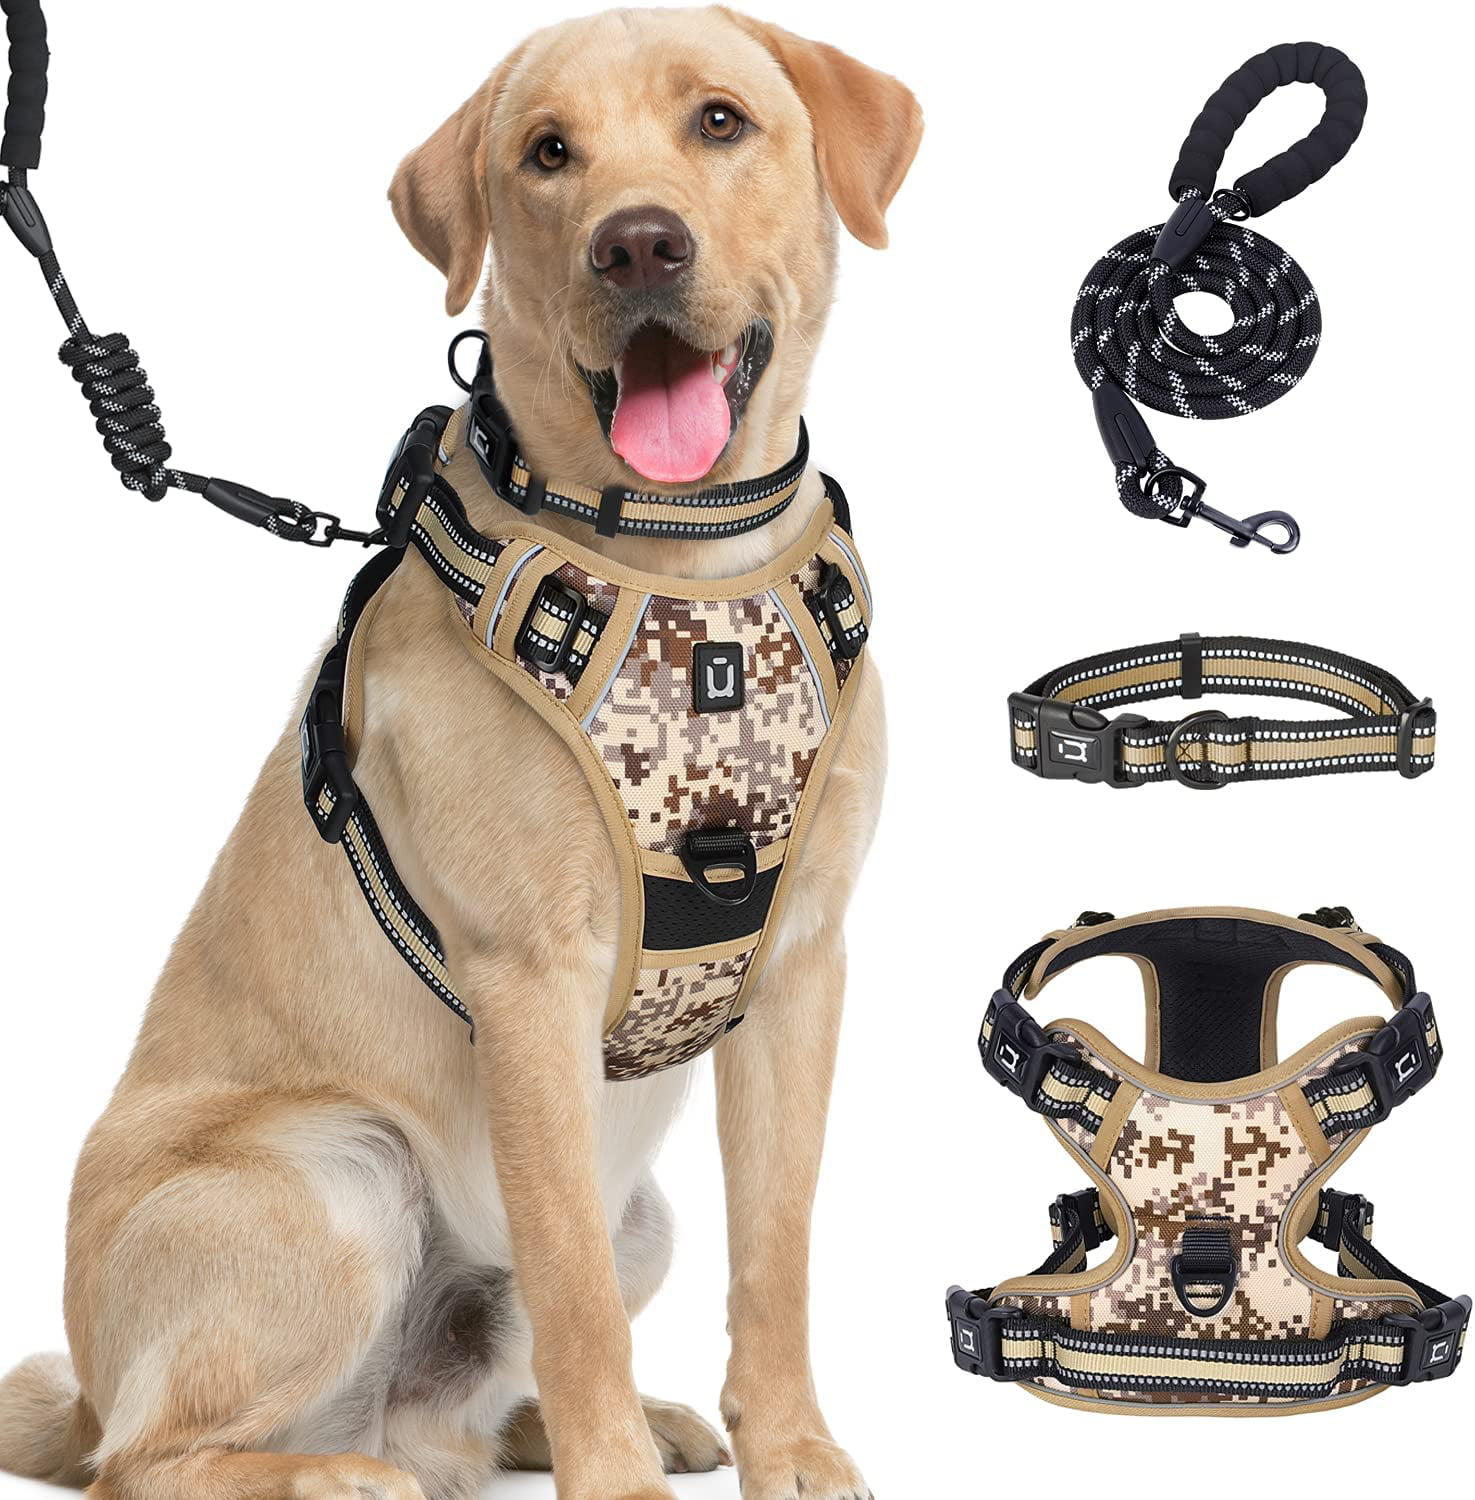 Dog Harness Waldseemuller Dog Harnesses for Small Dogs No Pull Reflective Oxford Soft Vest 4 Buckles Dog Harness for Large Dogs No Pull Medium Size Dog Harness,Dog Harness for Medium Dogs No Pull 